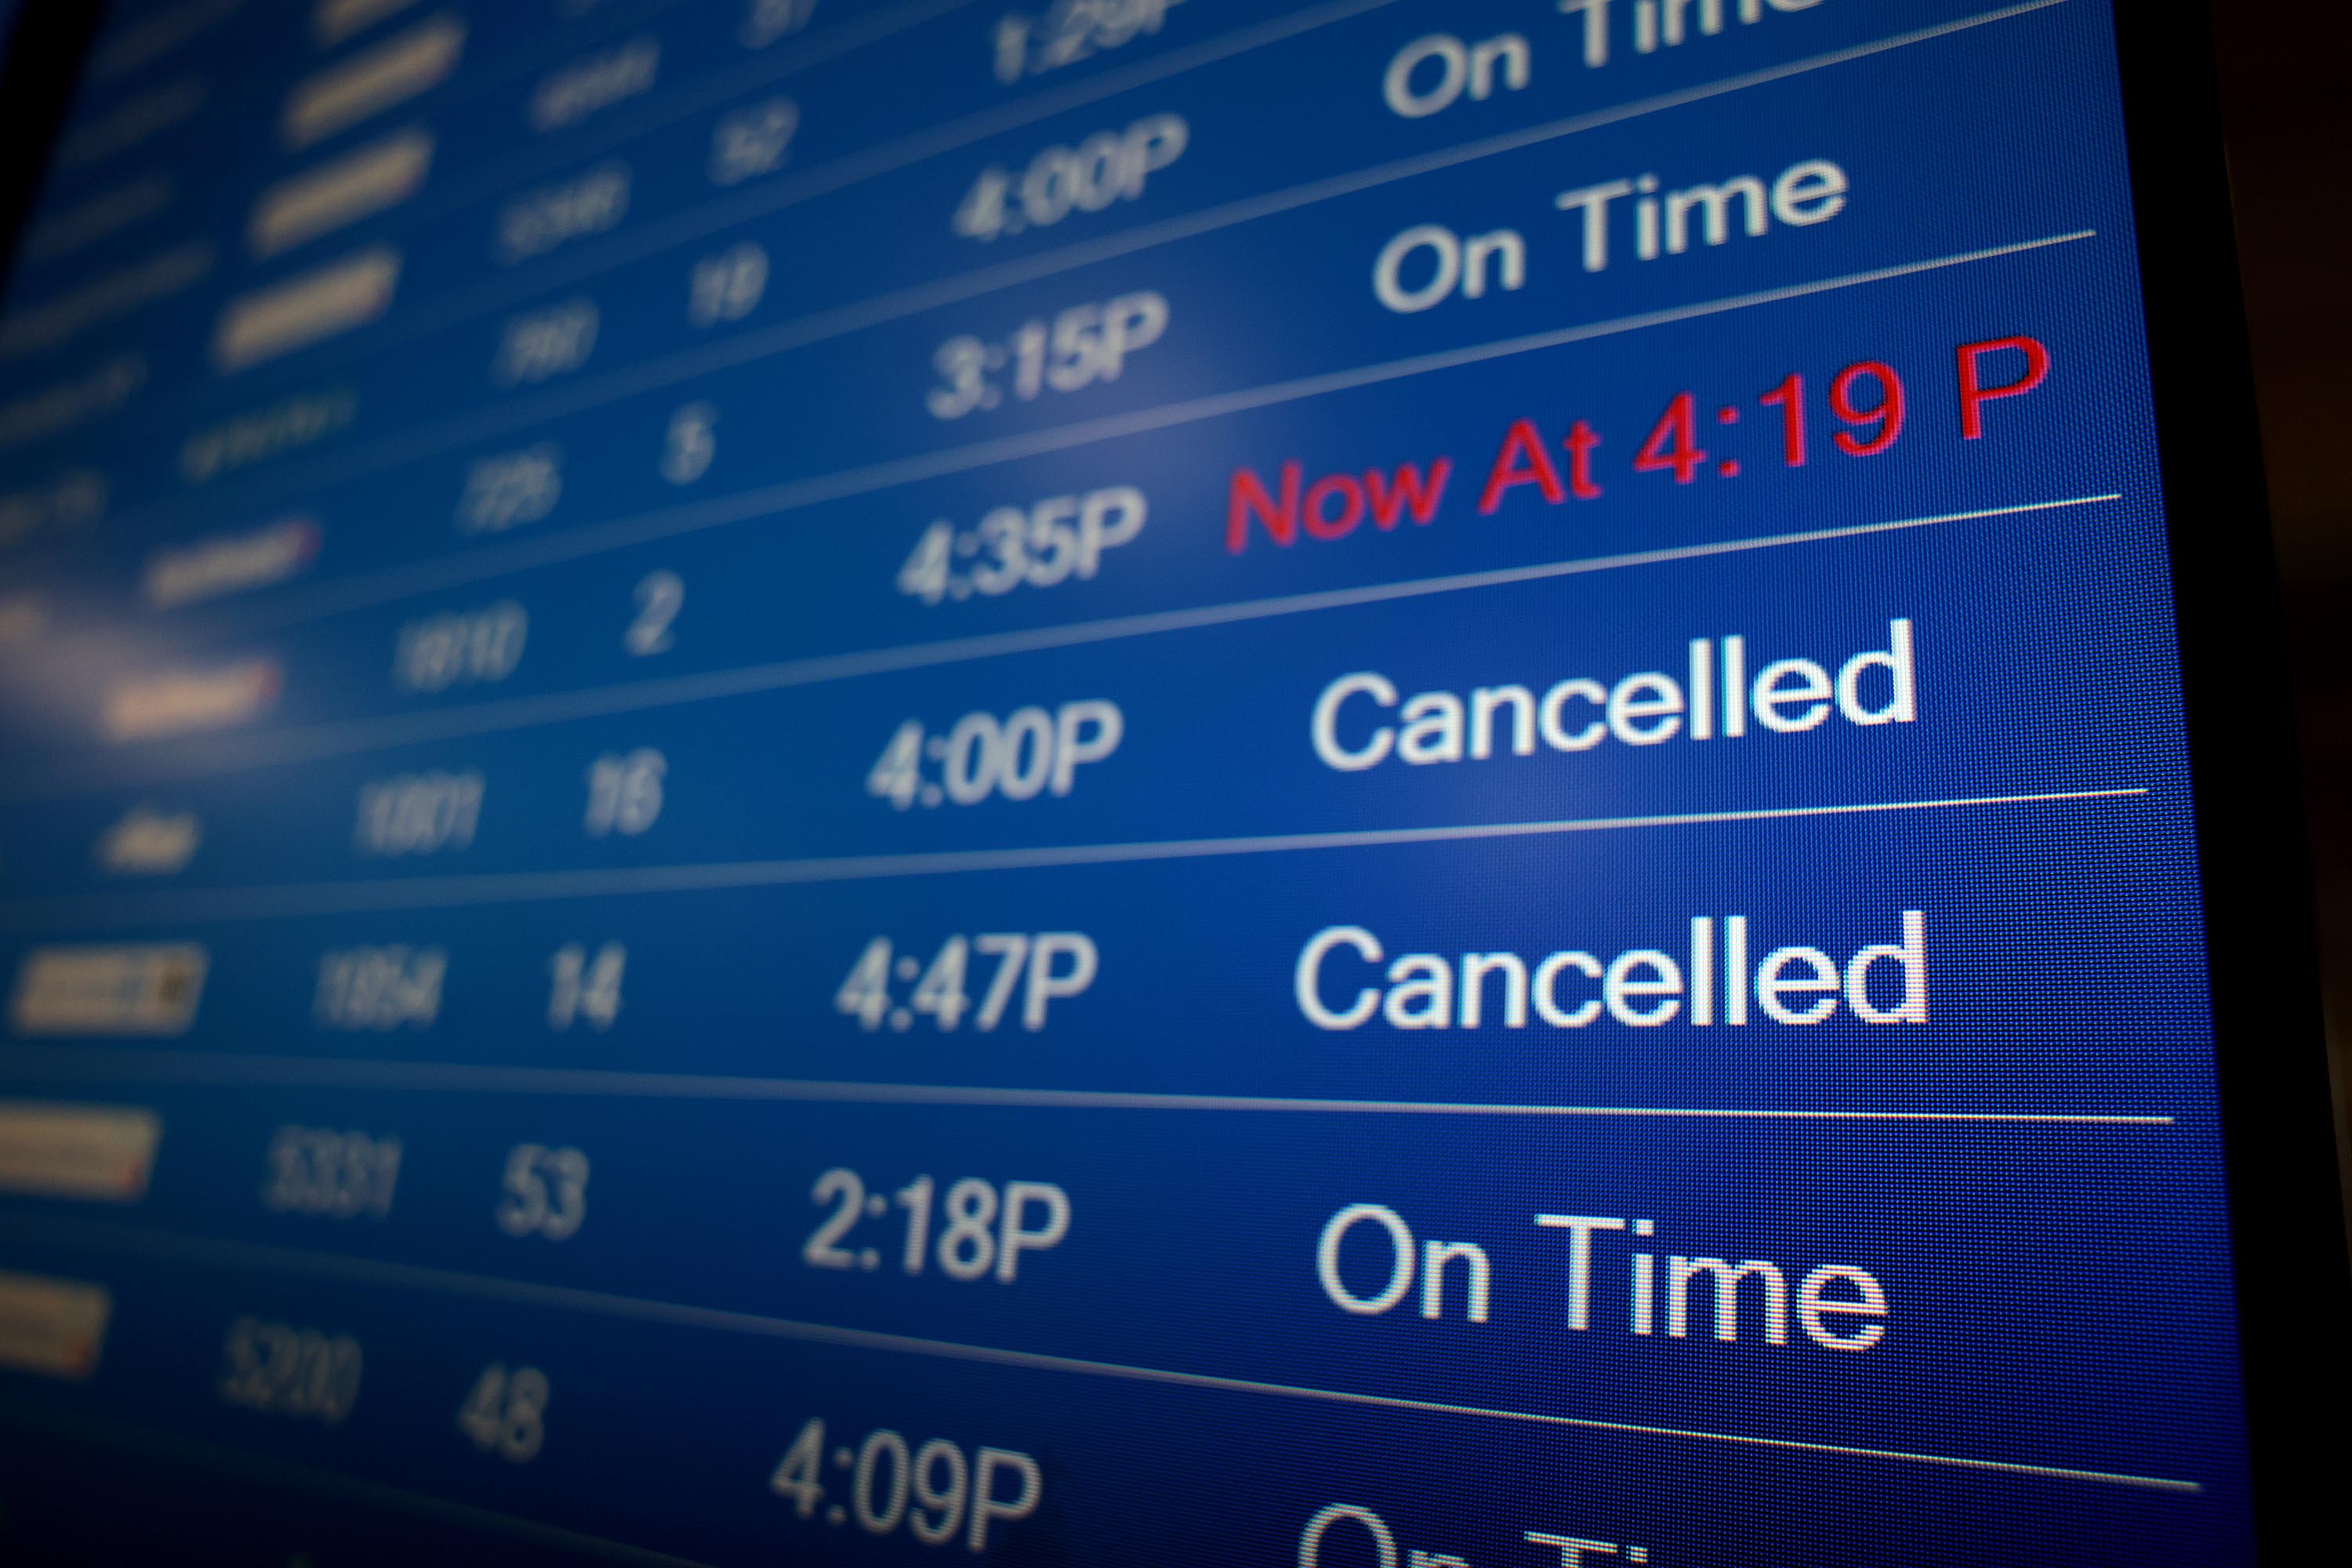 Flight Delayed? Here Are Some Awesome Ideas on What to Do